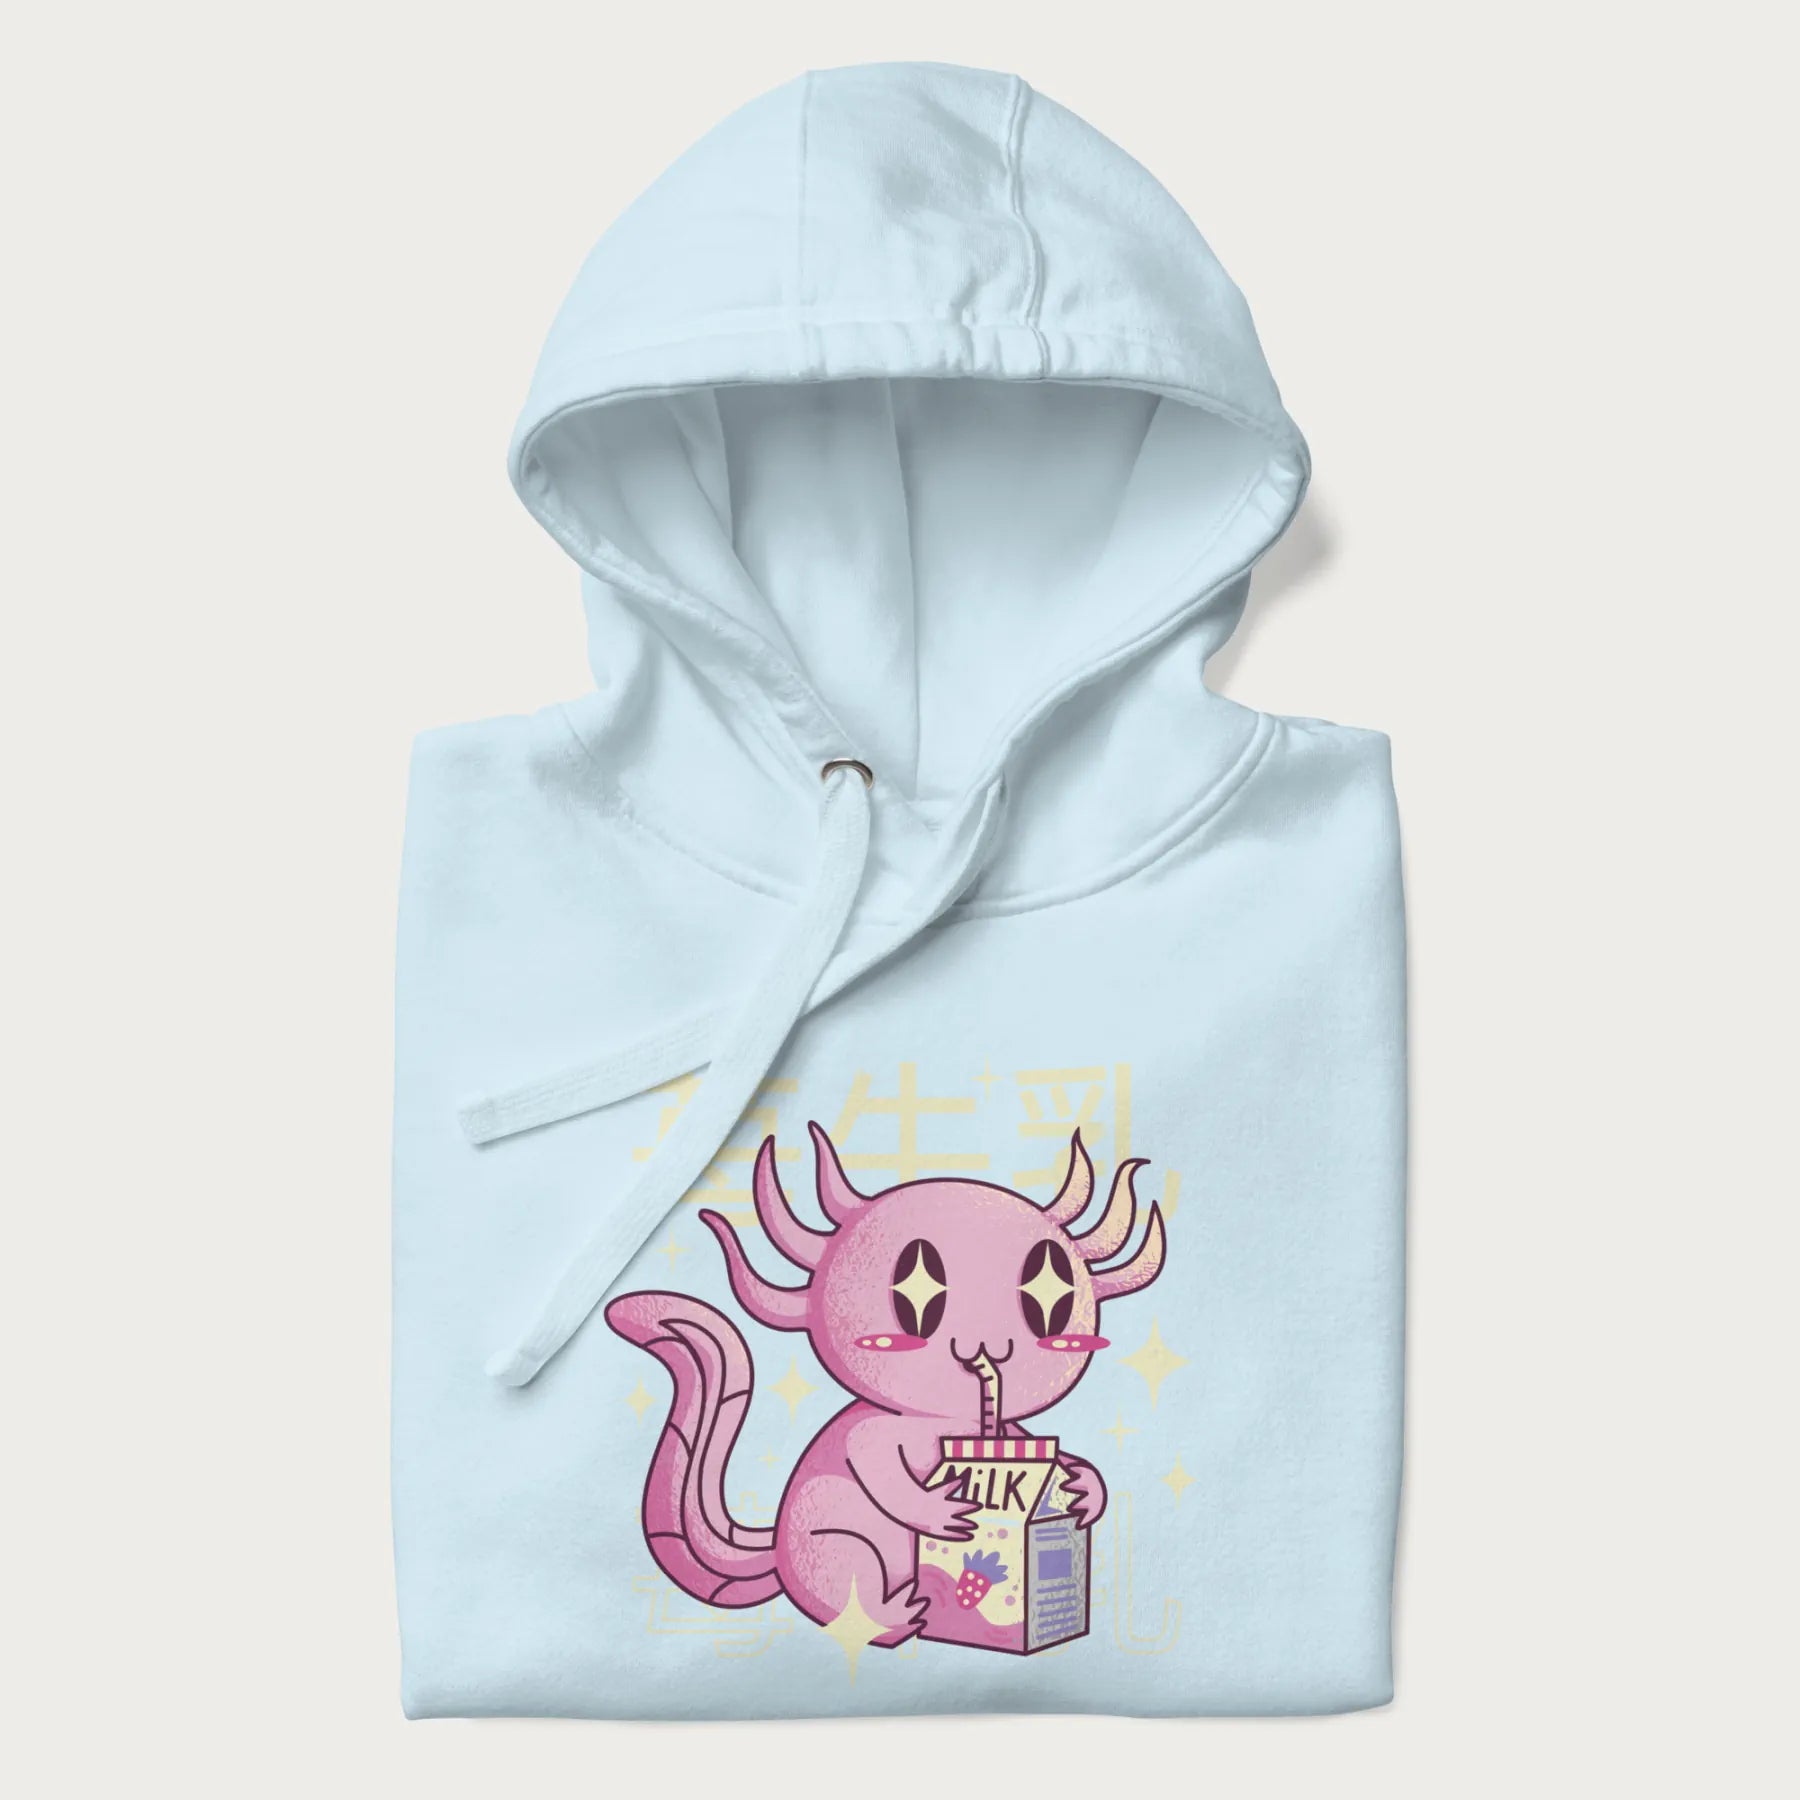 Folded light blue hoodie with Japanese graphic of a cute pink axolotl sipping strawberry milk from a carton, with Japanese text '苺牛乳' (Strawberry Milk).